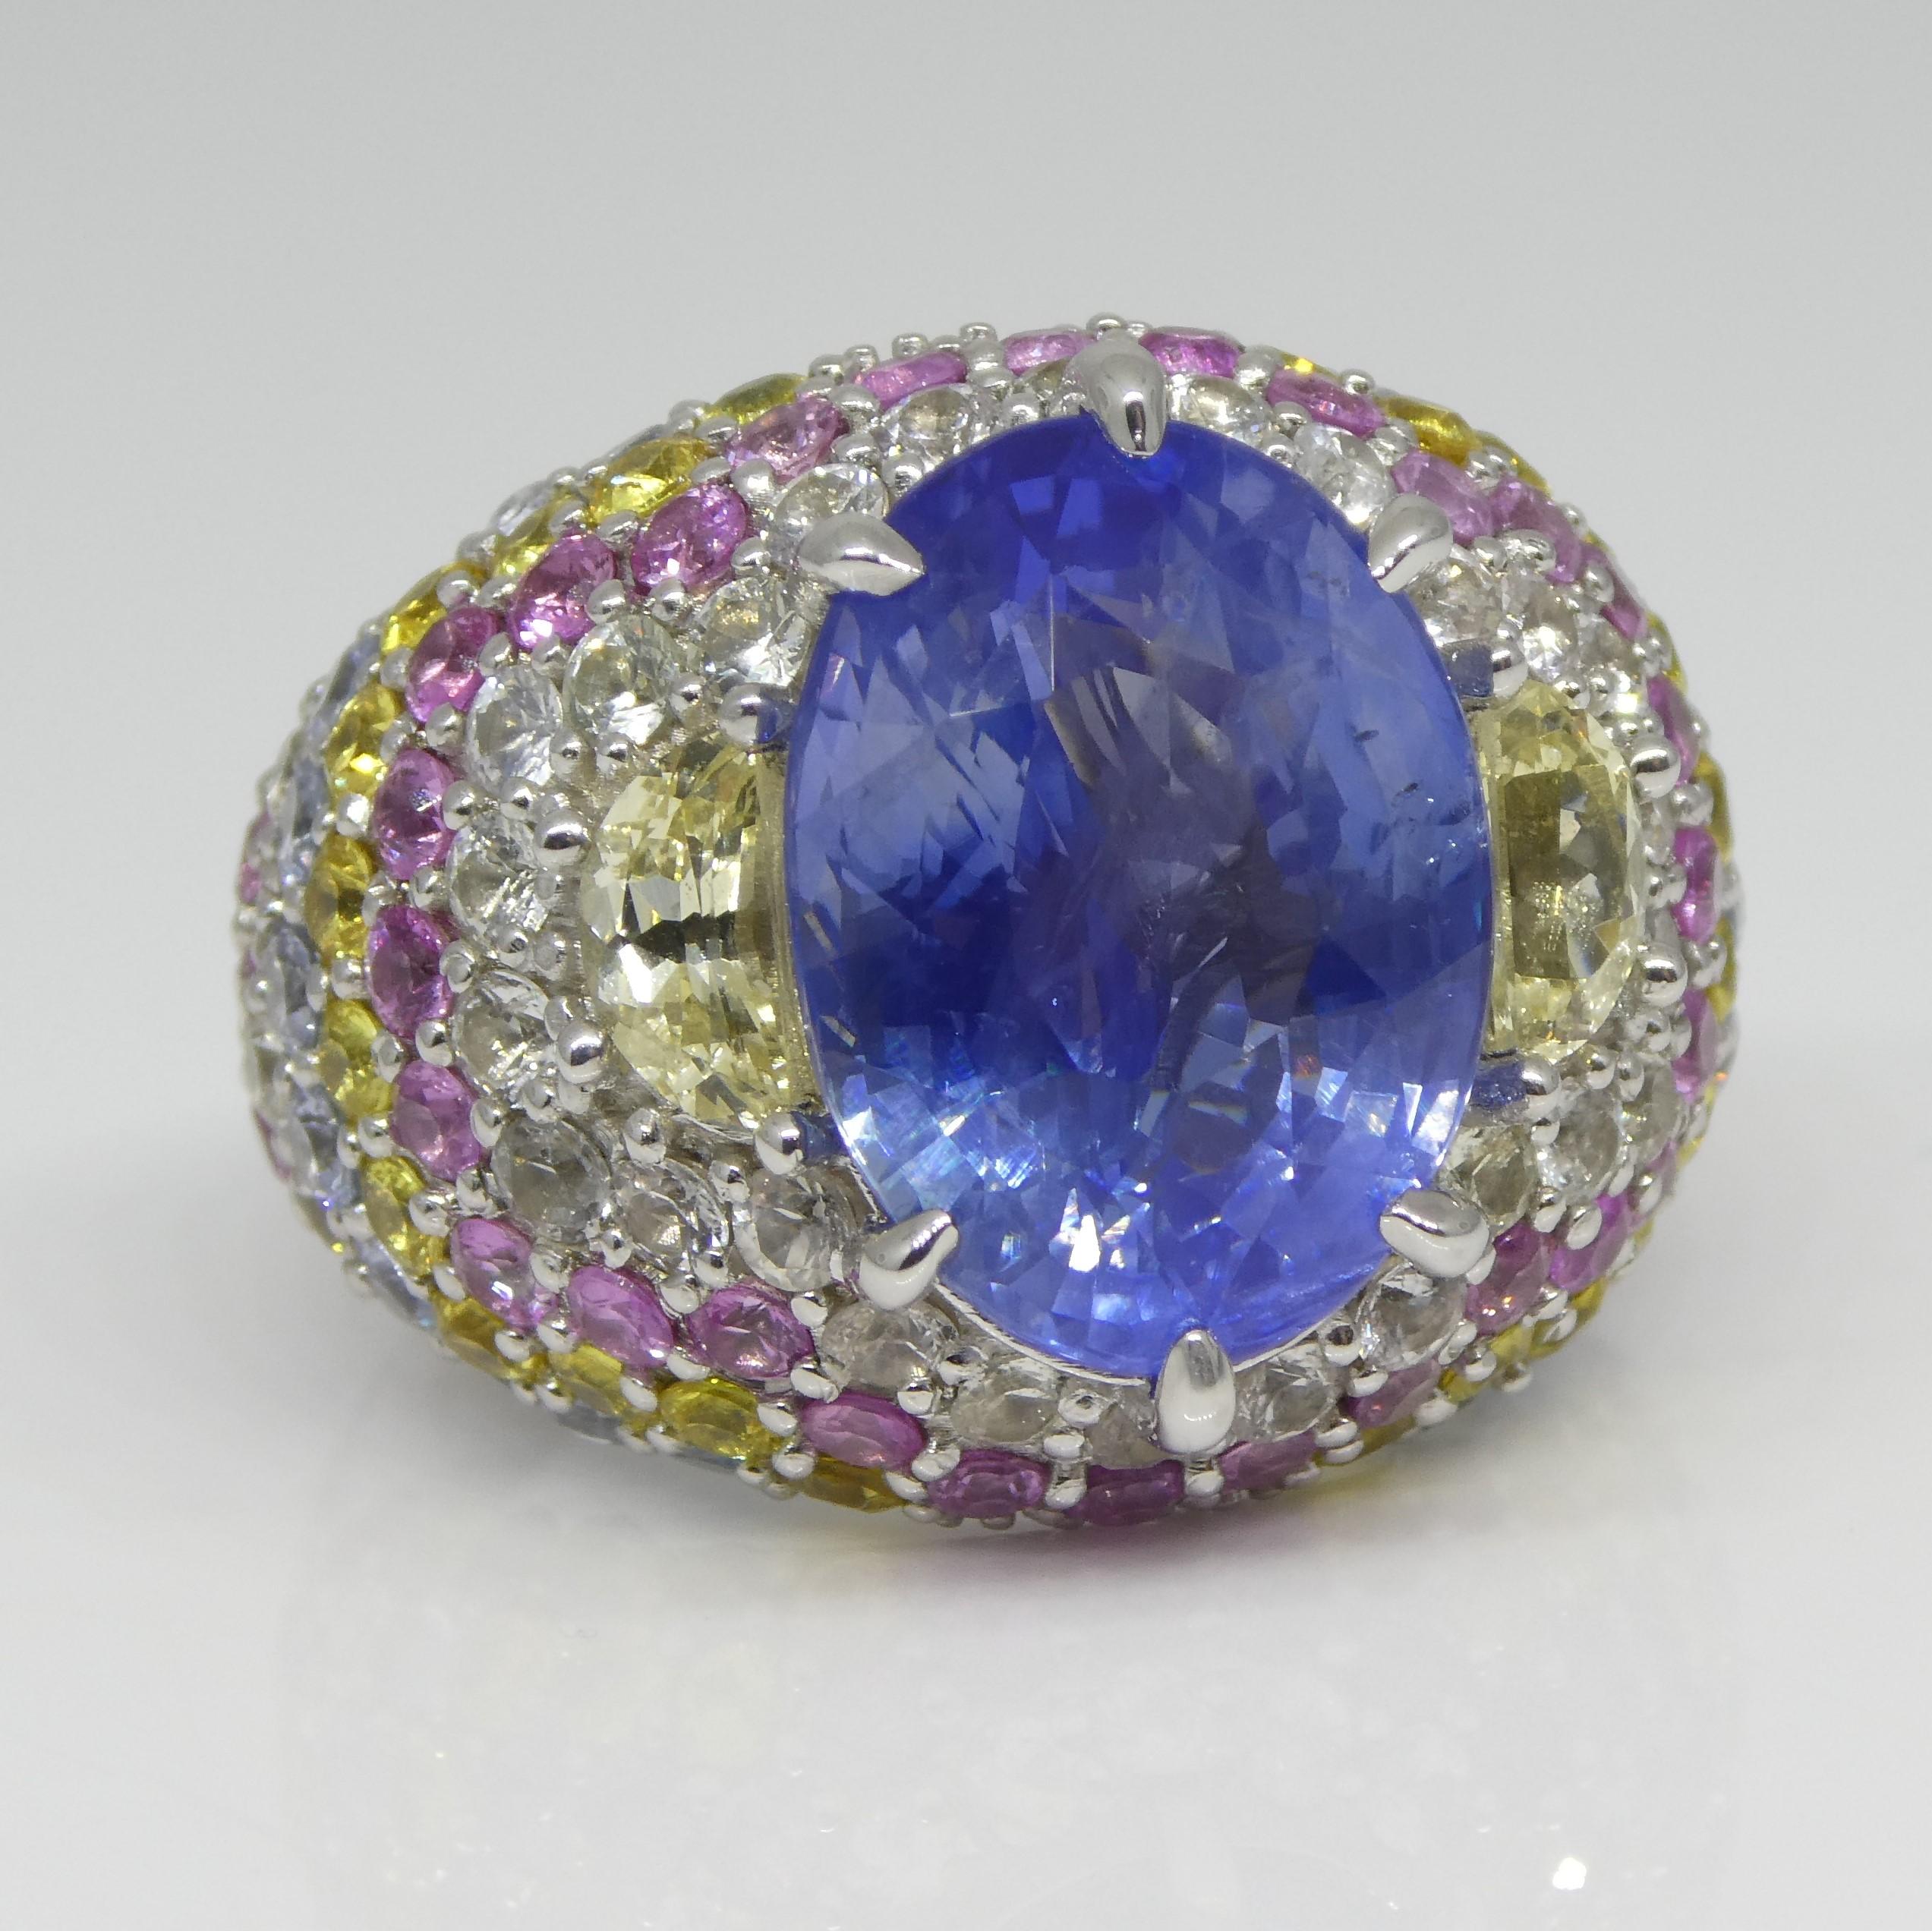 10.03ct Unheated Blue Sapphire Cluster Ring in 18k White Gold 14